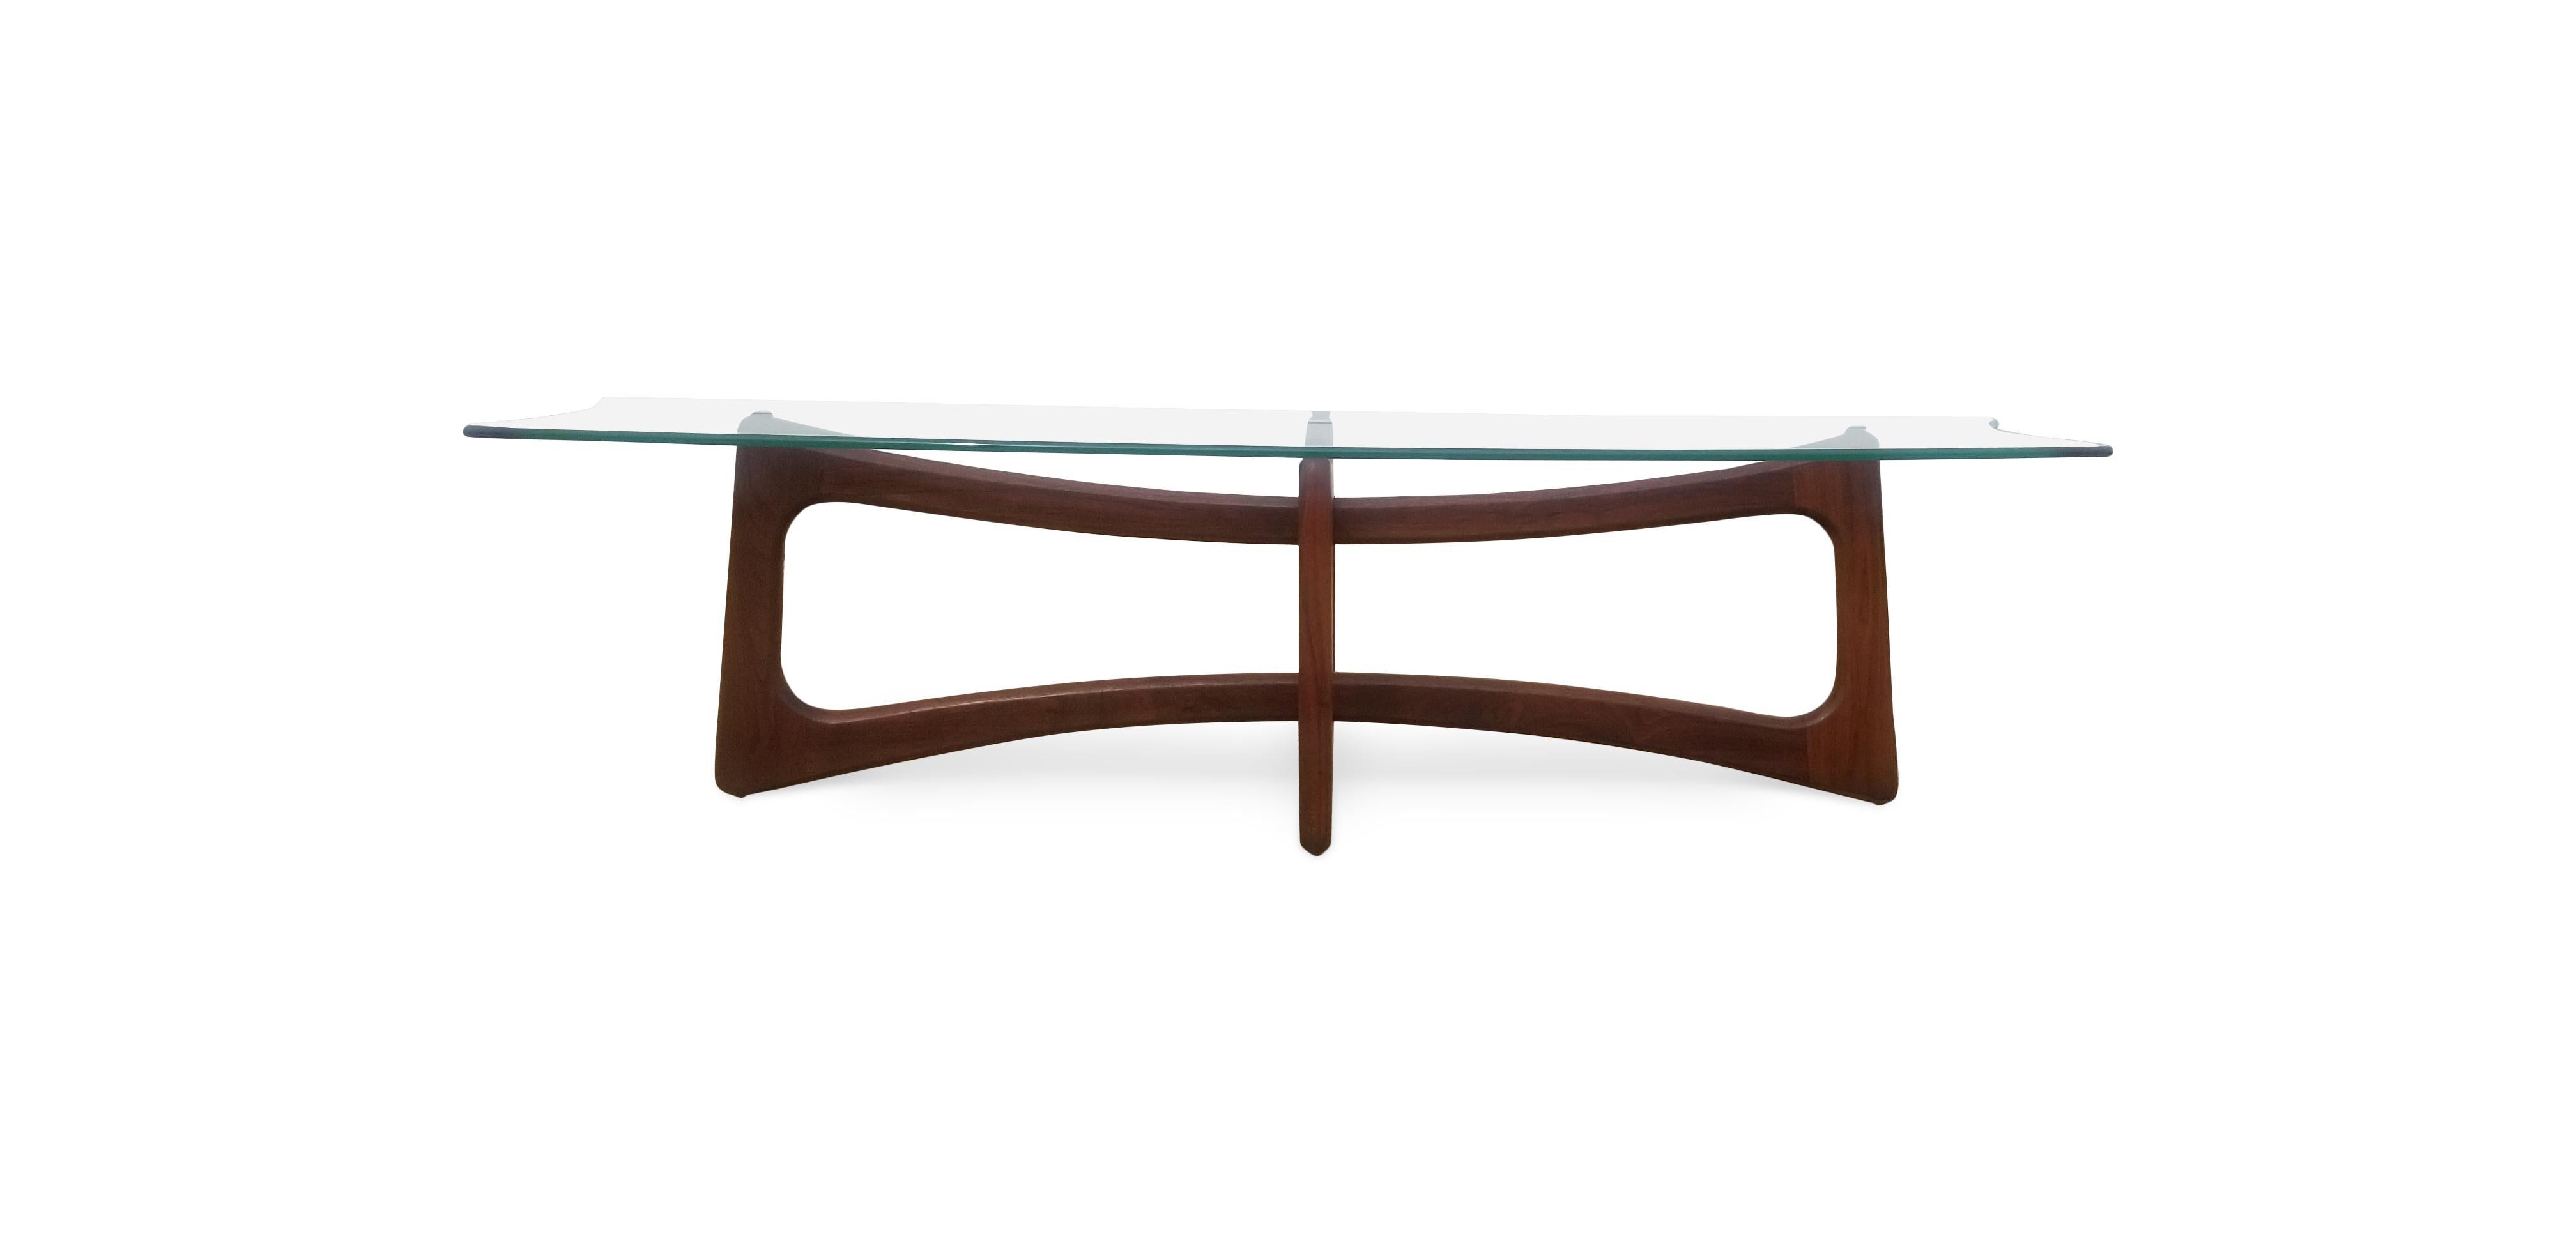 20th Century Adrian Pearsall Sculptural Walnut Coffee Table